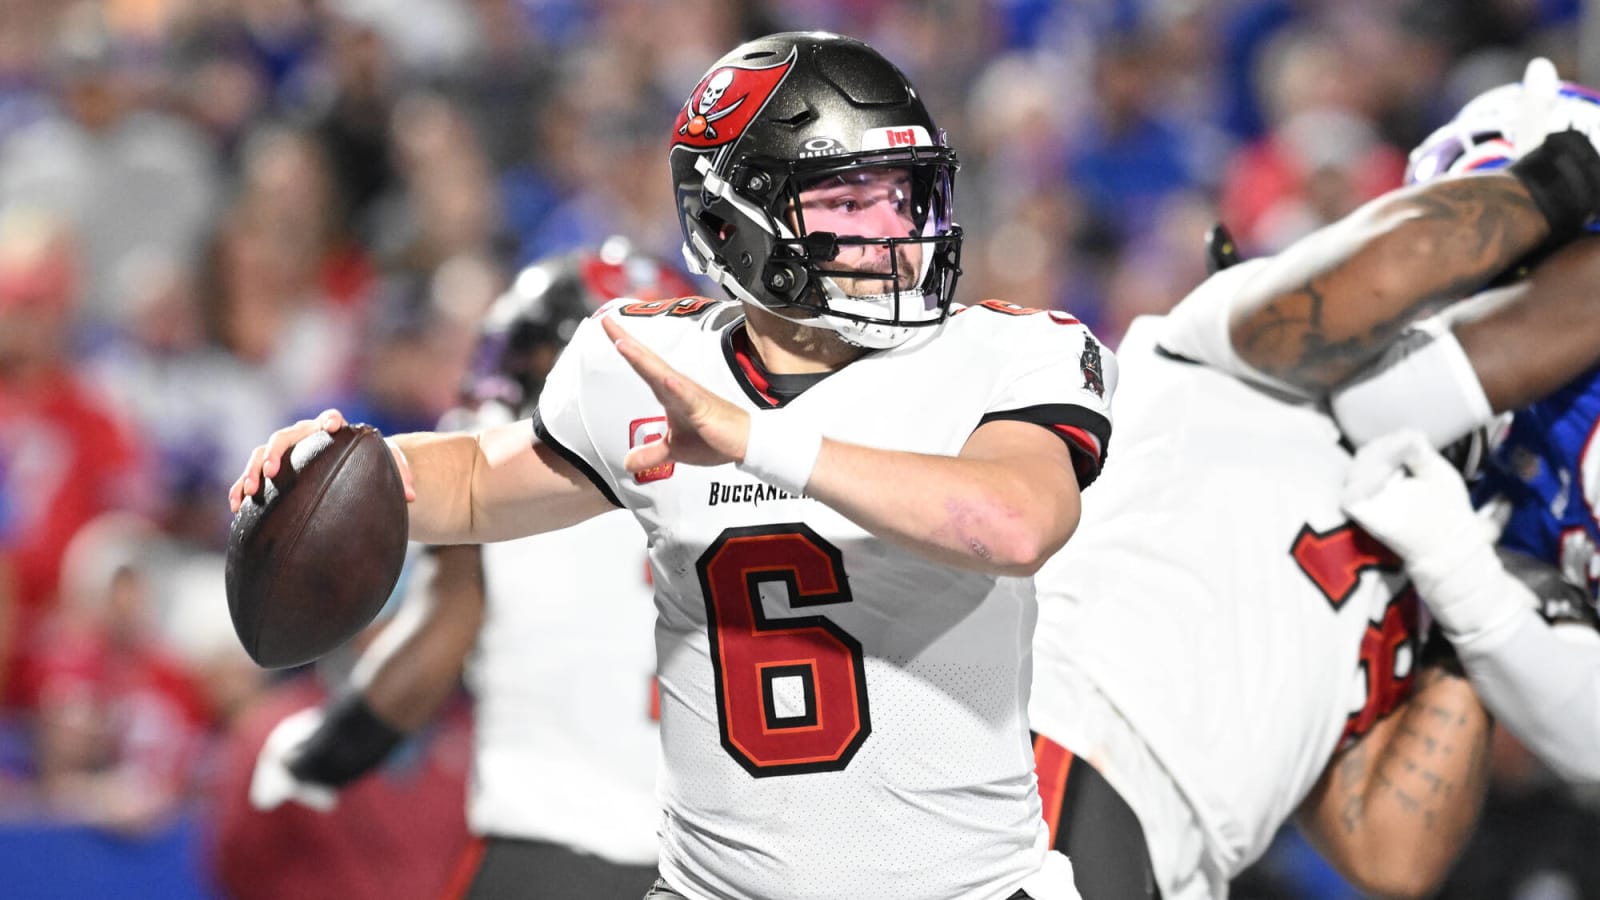 Todd Bowles: Baker Mayfield 'Captaining The Ship Very Well'